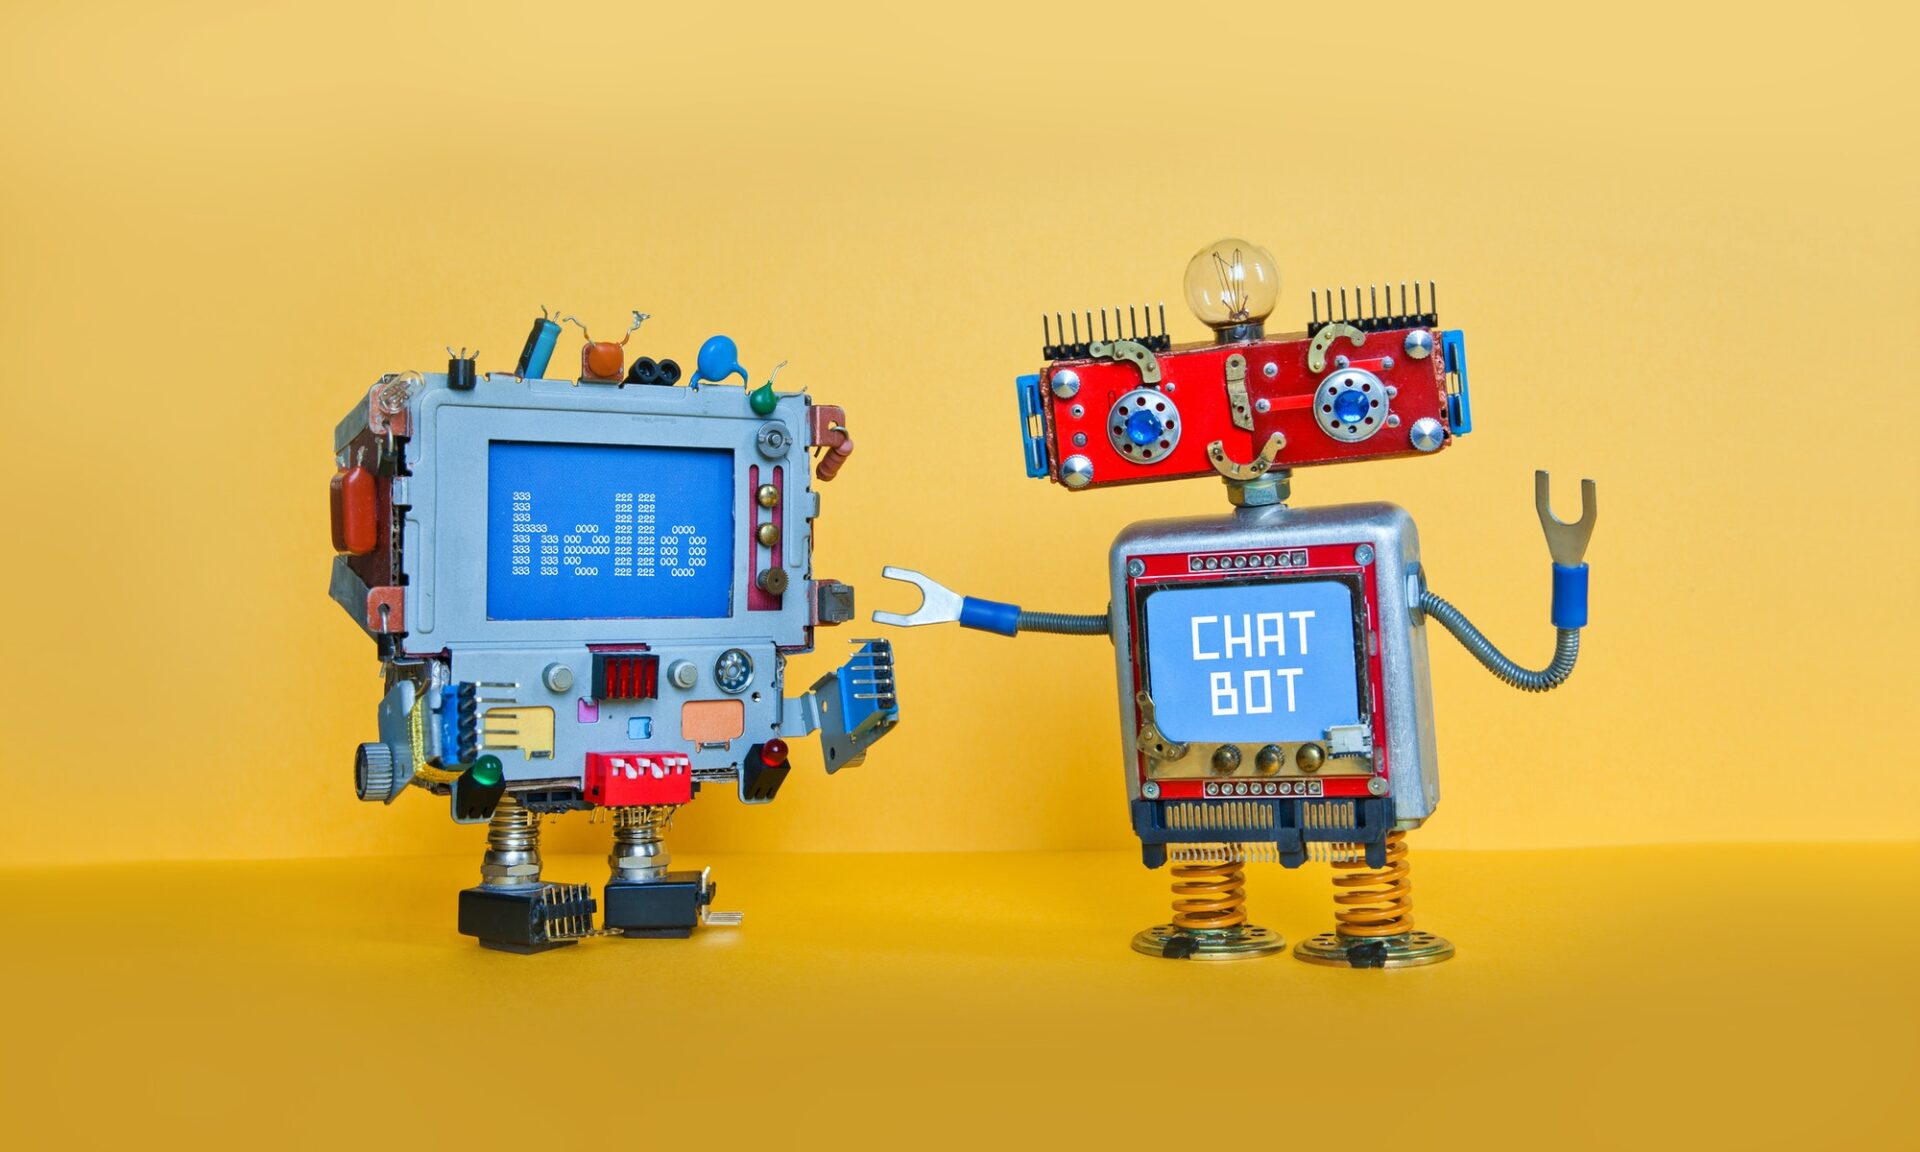 Chat Bot Robot Welcomes Android Robotic Character Creative Design Toys On Yellow Background 